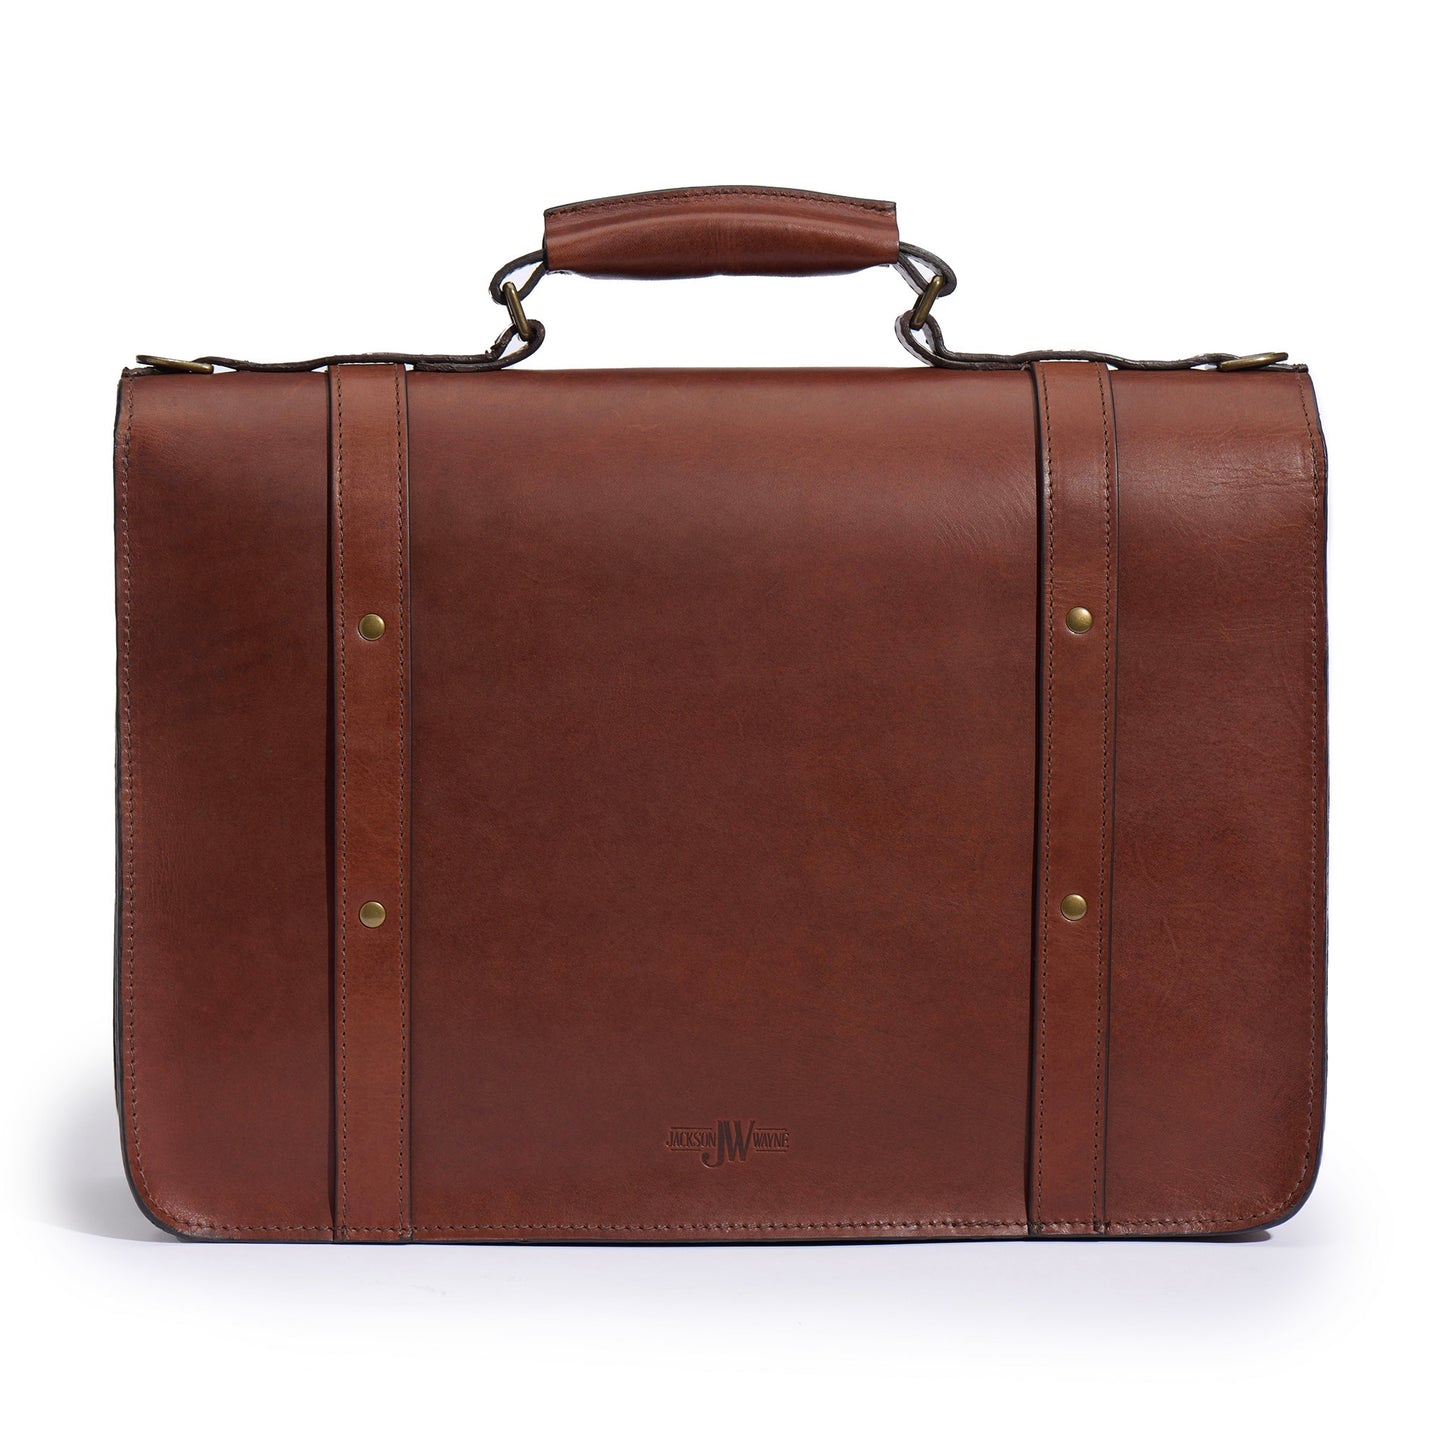 Esq. Briefcase in Vintage Brown leather back side with new logo